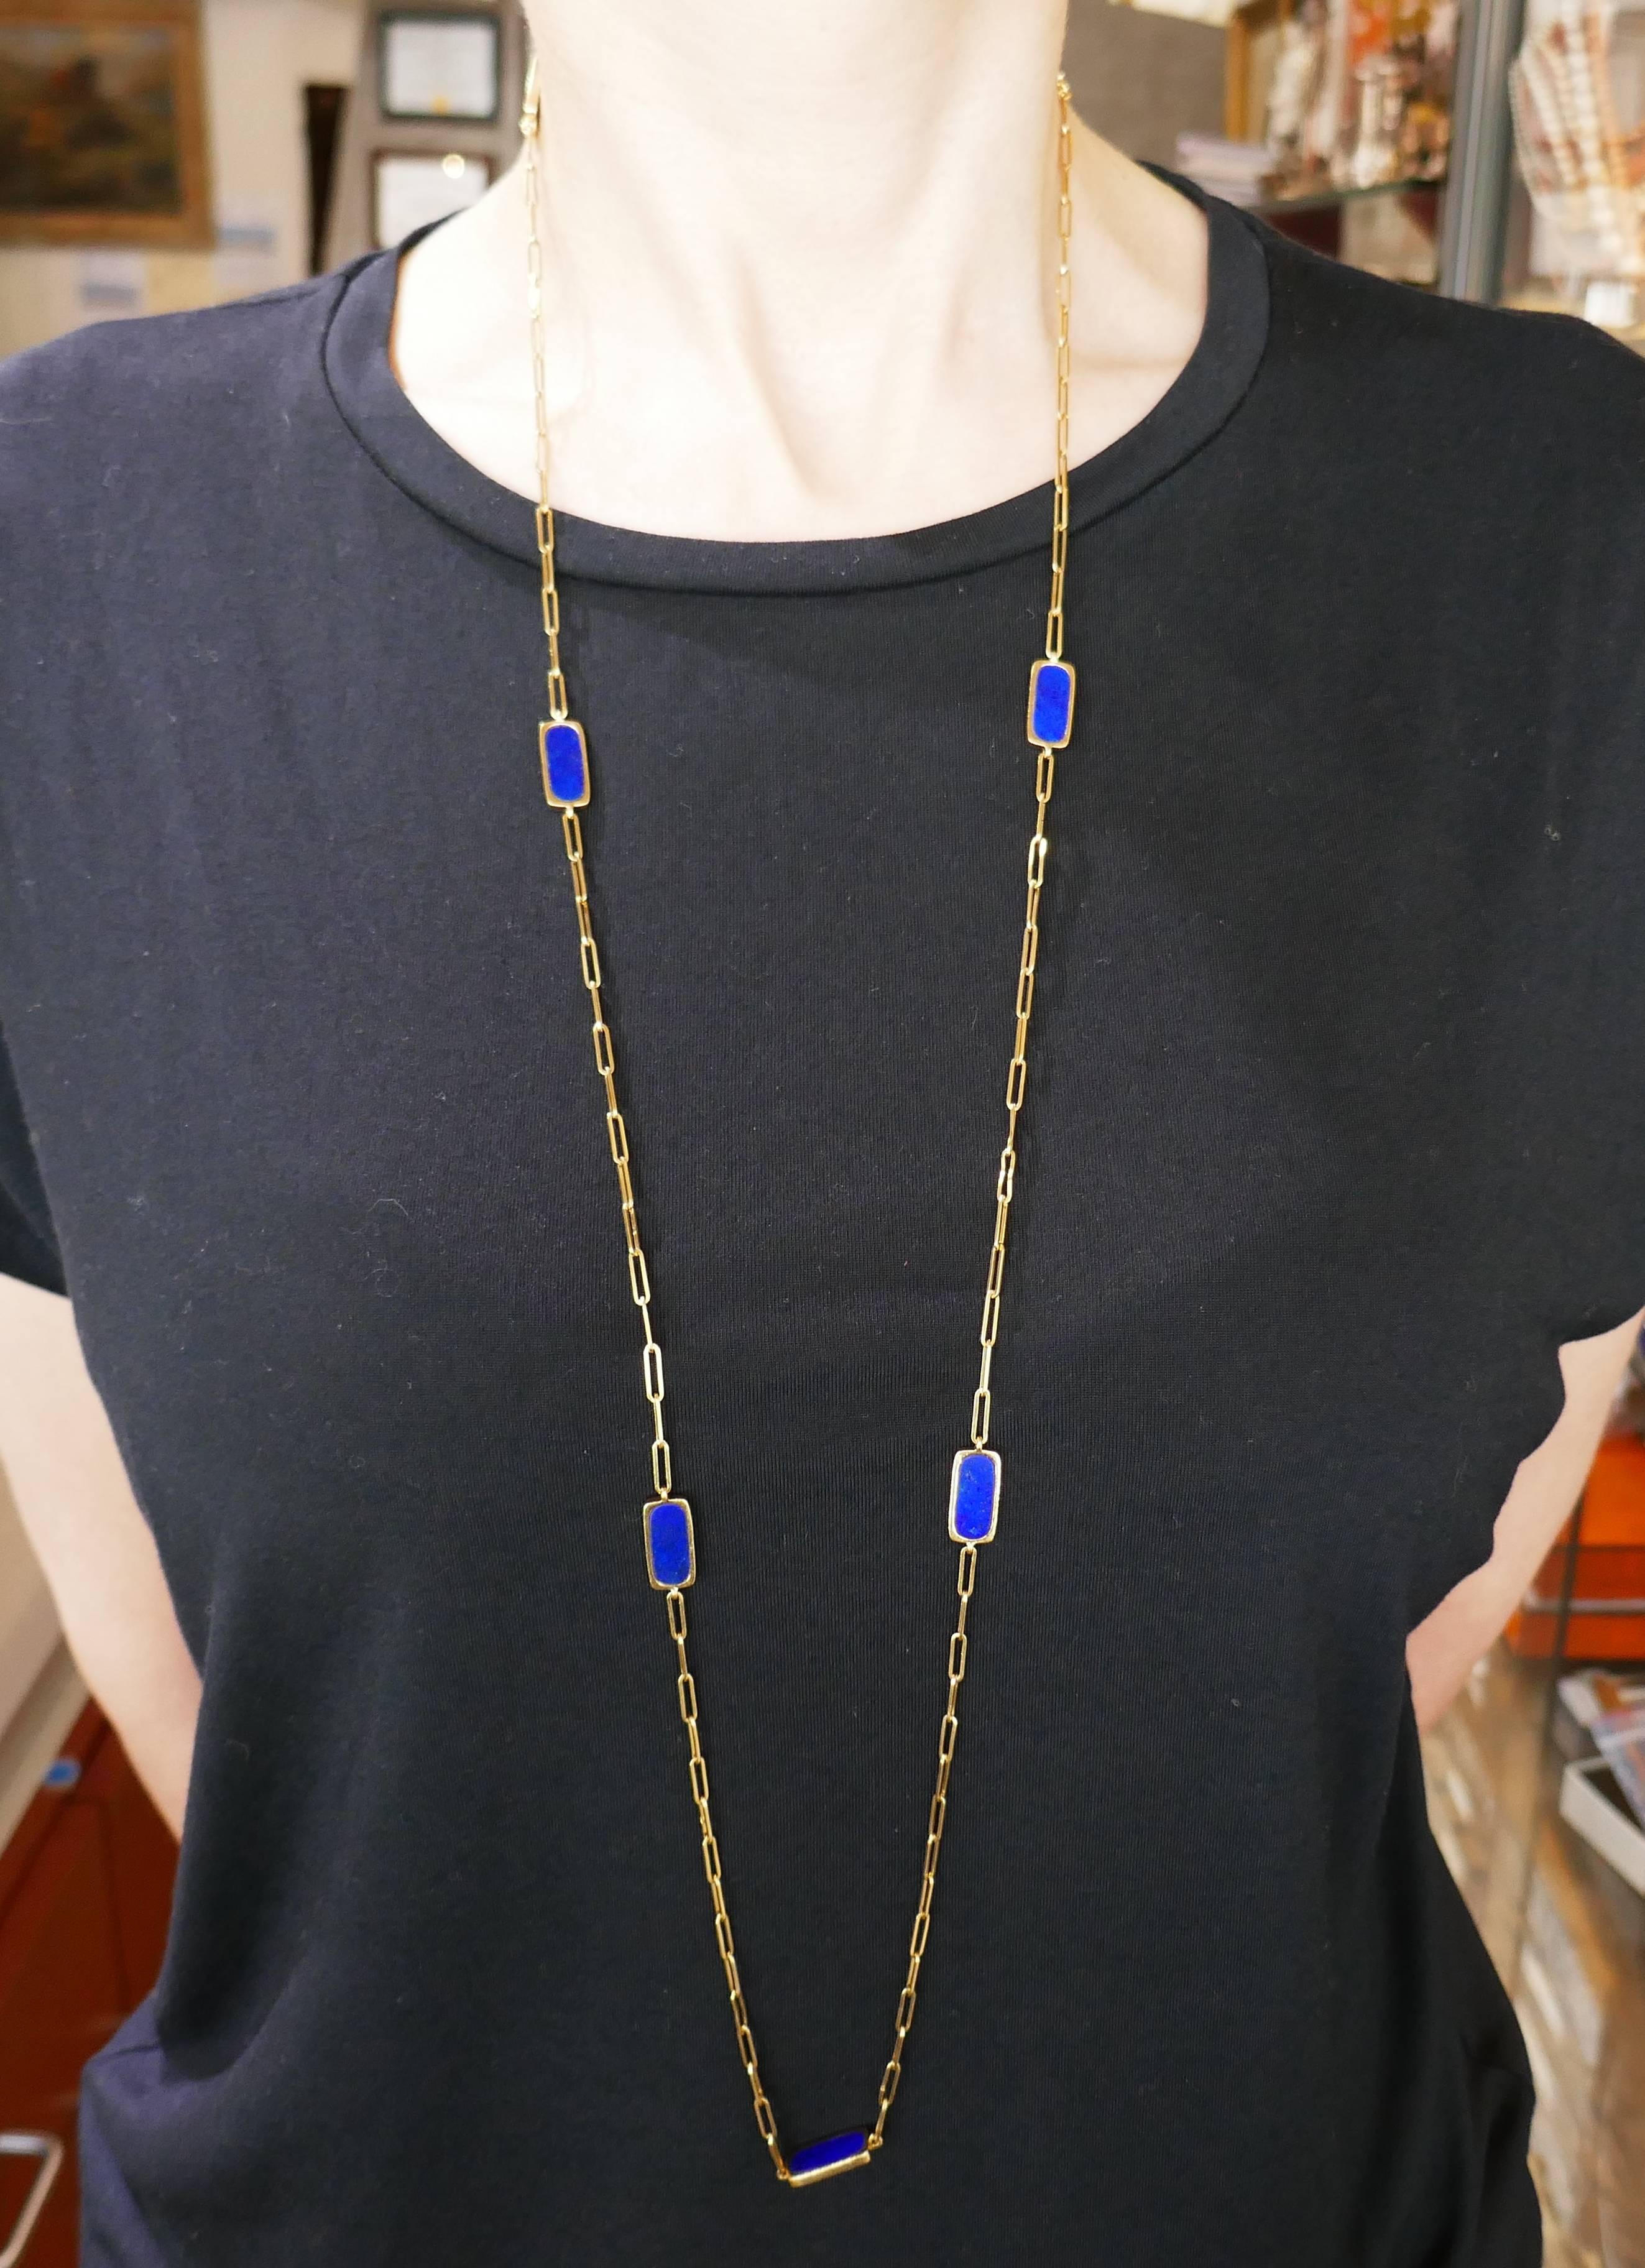 Chic and colorful necklace created by Dinh Van in 1971. Trendy, versatile and wearable, it is a great addition to your jewelry collection. 
The necklace is made of 18 karat yellow gold and lapis lazuli. 
The necklace is 39 inches (99 centimeters)